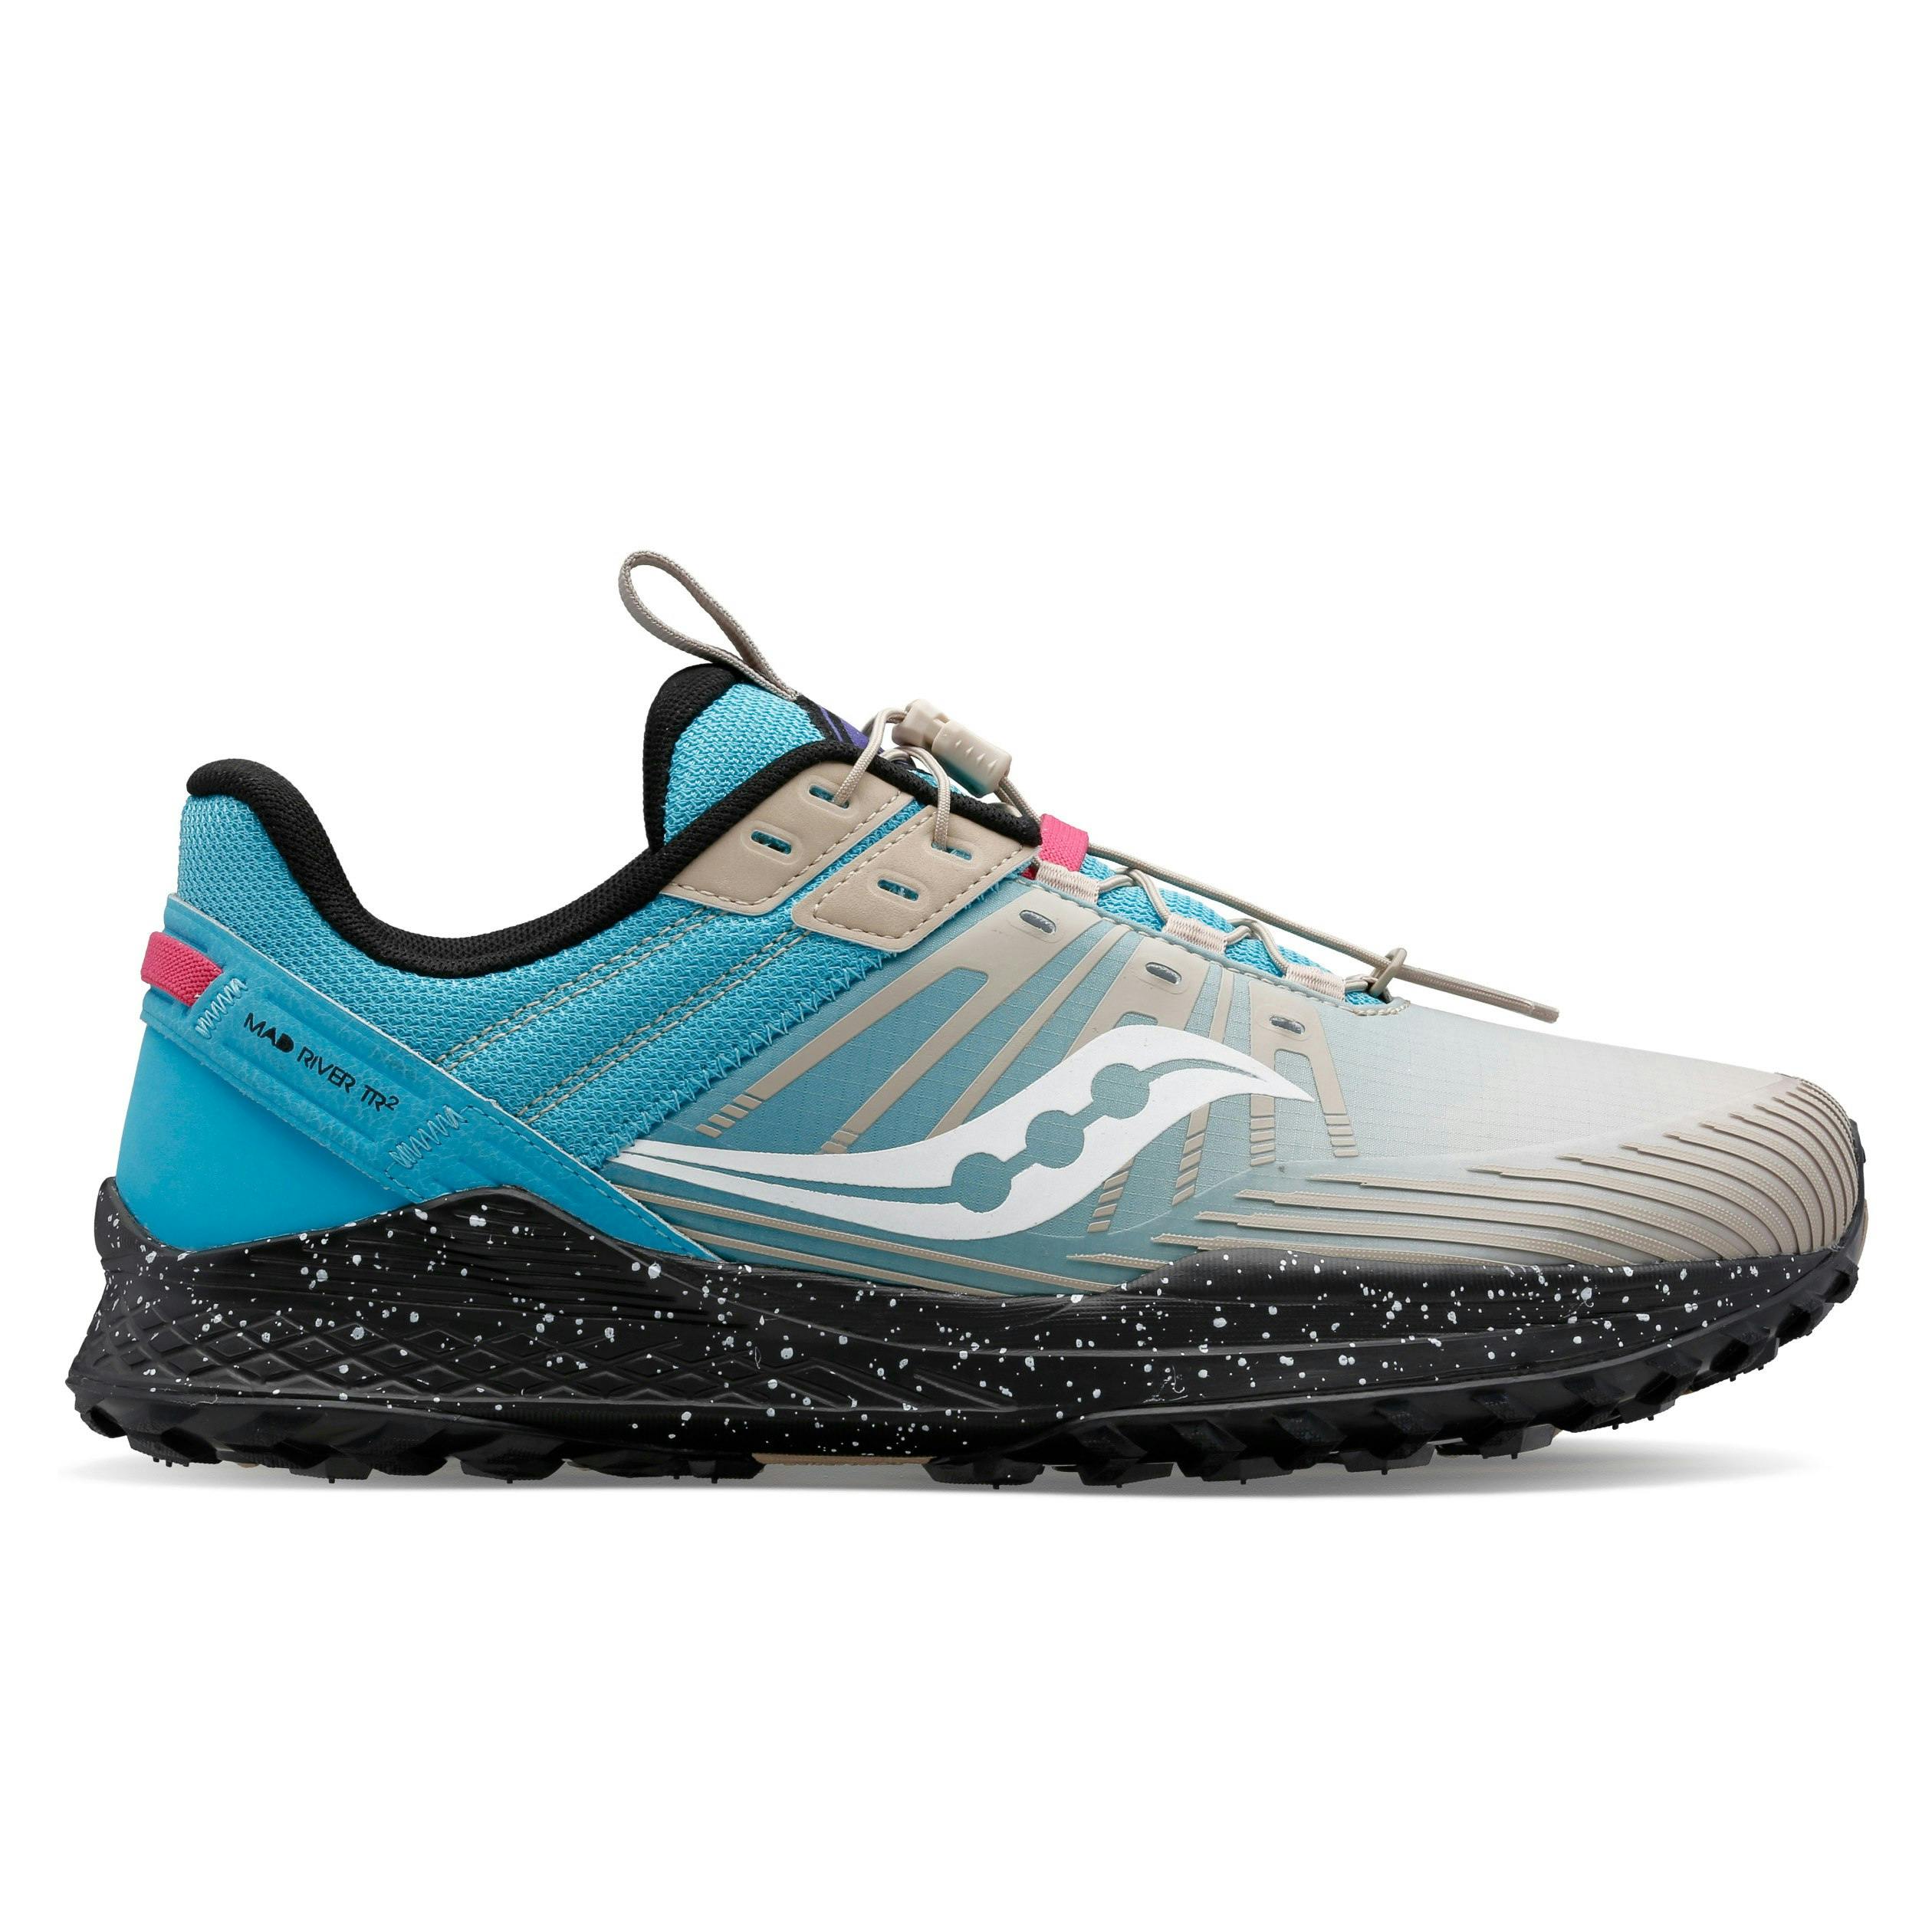 Mad River TR2 "Water" Running Shoe